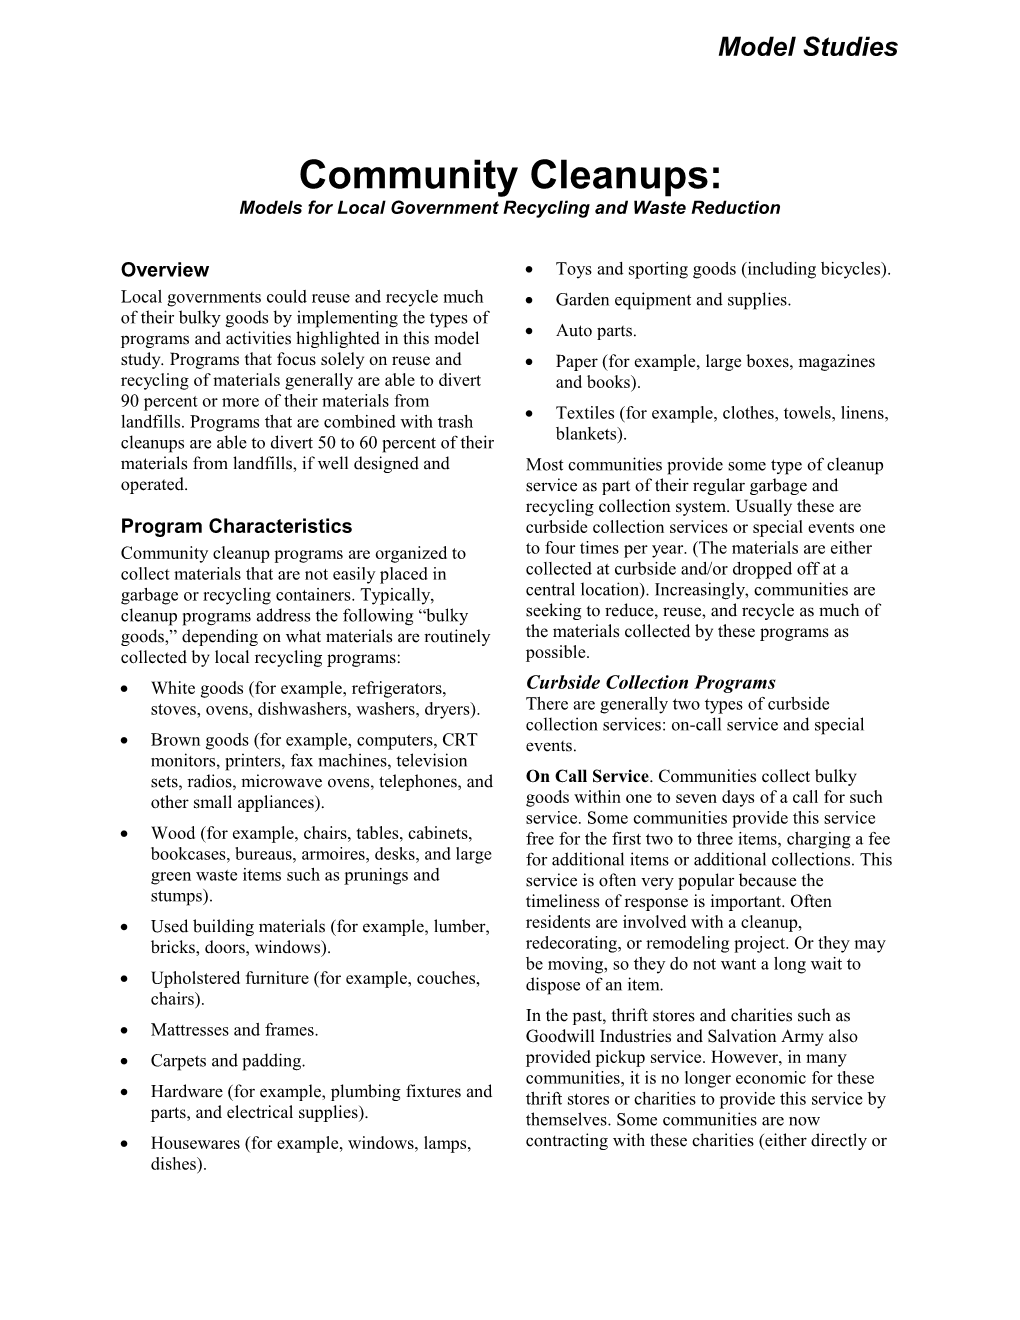 Community Cleanups: Models for Local Government Recycling and Waste Reduction